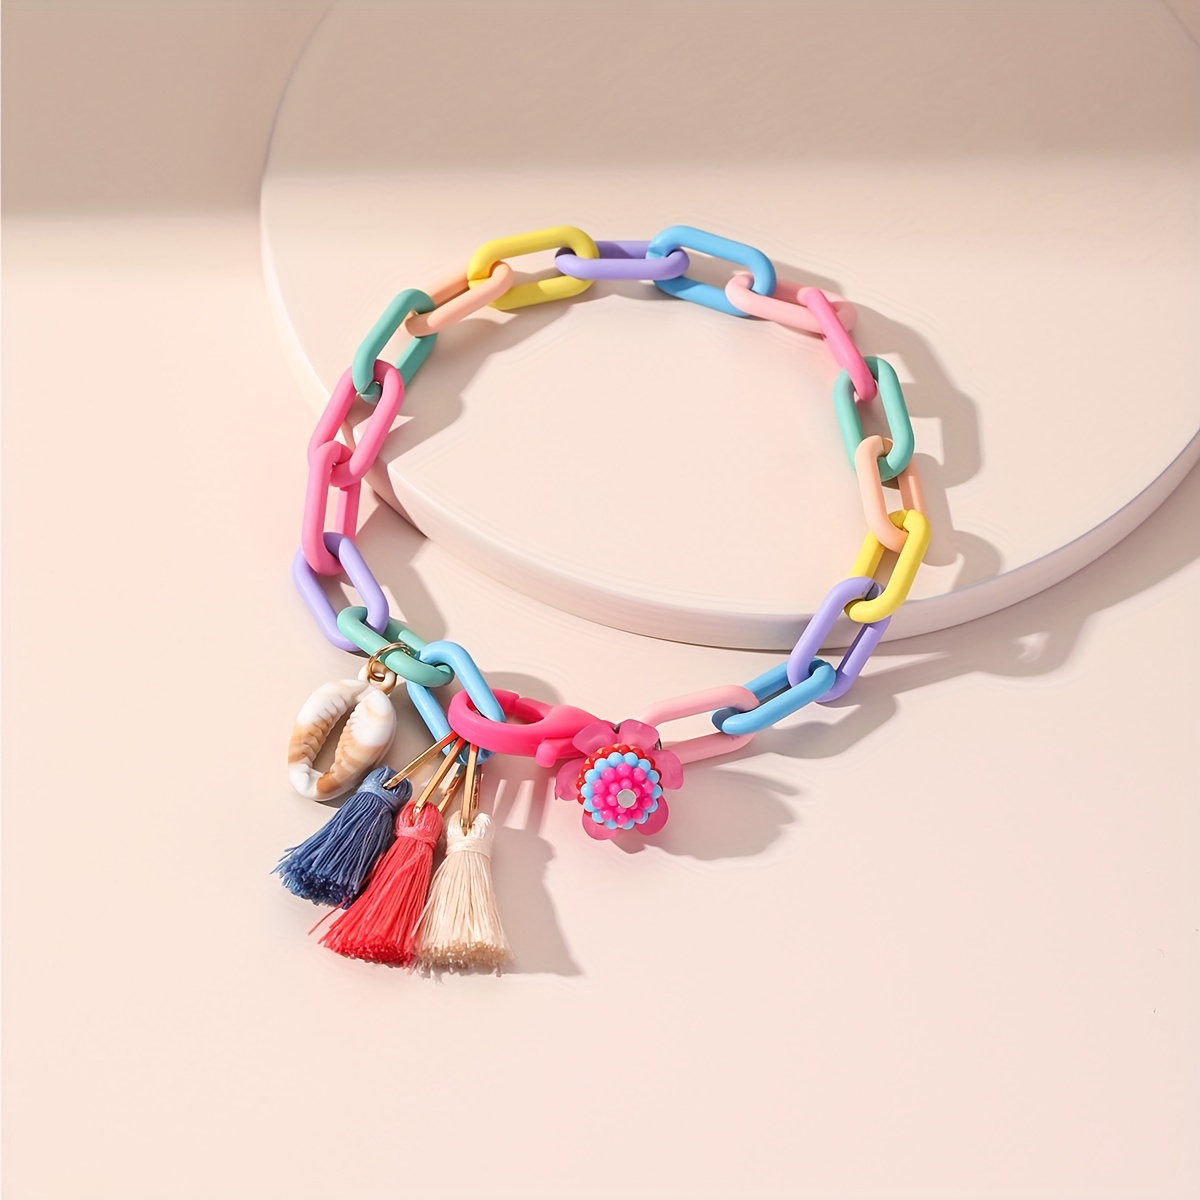 

1 Strand Bohemian Handmade Acrylic Seashell Tassel Foot Chain With Vibrant Colors, Perfect For A Summer Beach Style Personality Versatile Fashion Lively Style Anklet Jewelry